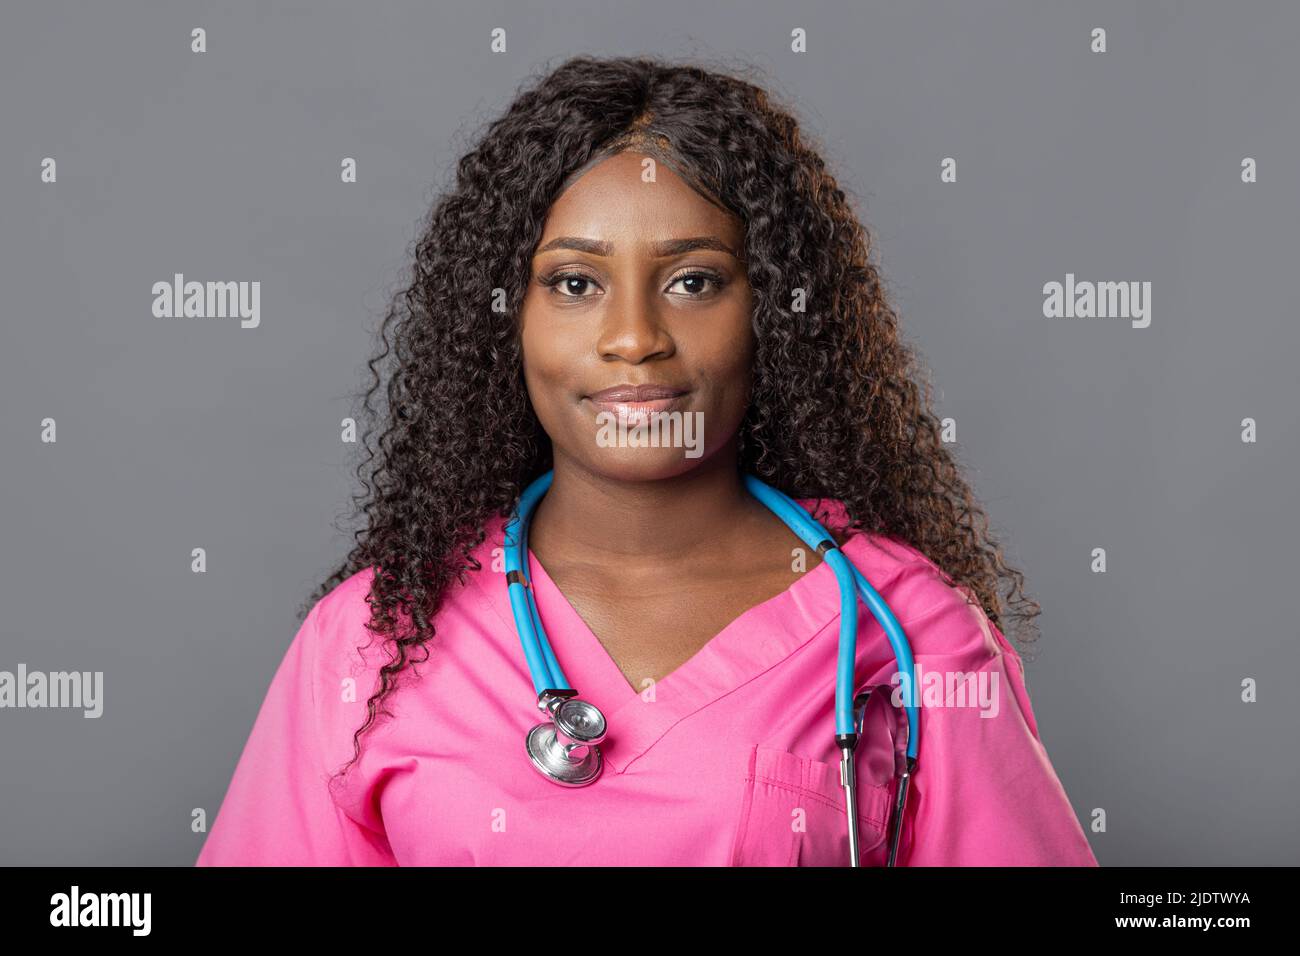 Young doctor black african woman smiling with stethoscope in pink uniform on gray background. Stock Photo